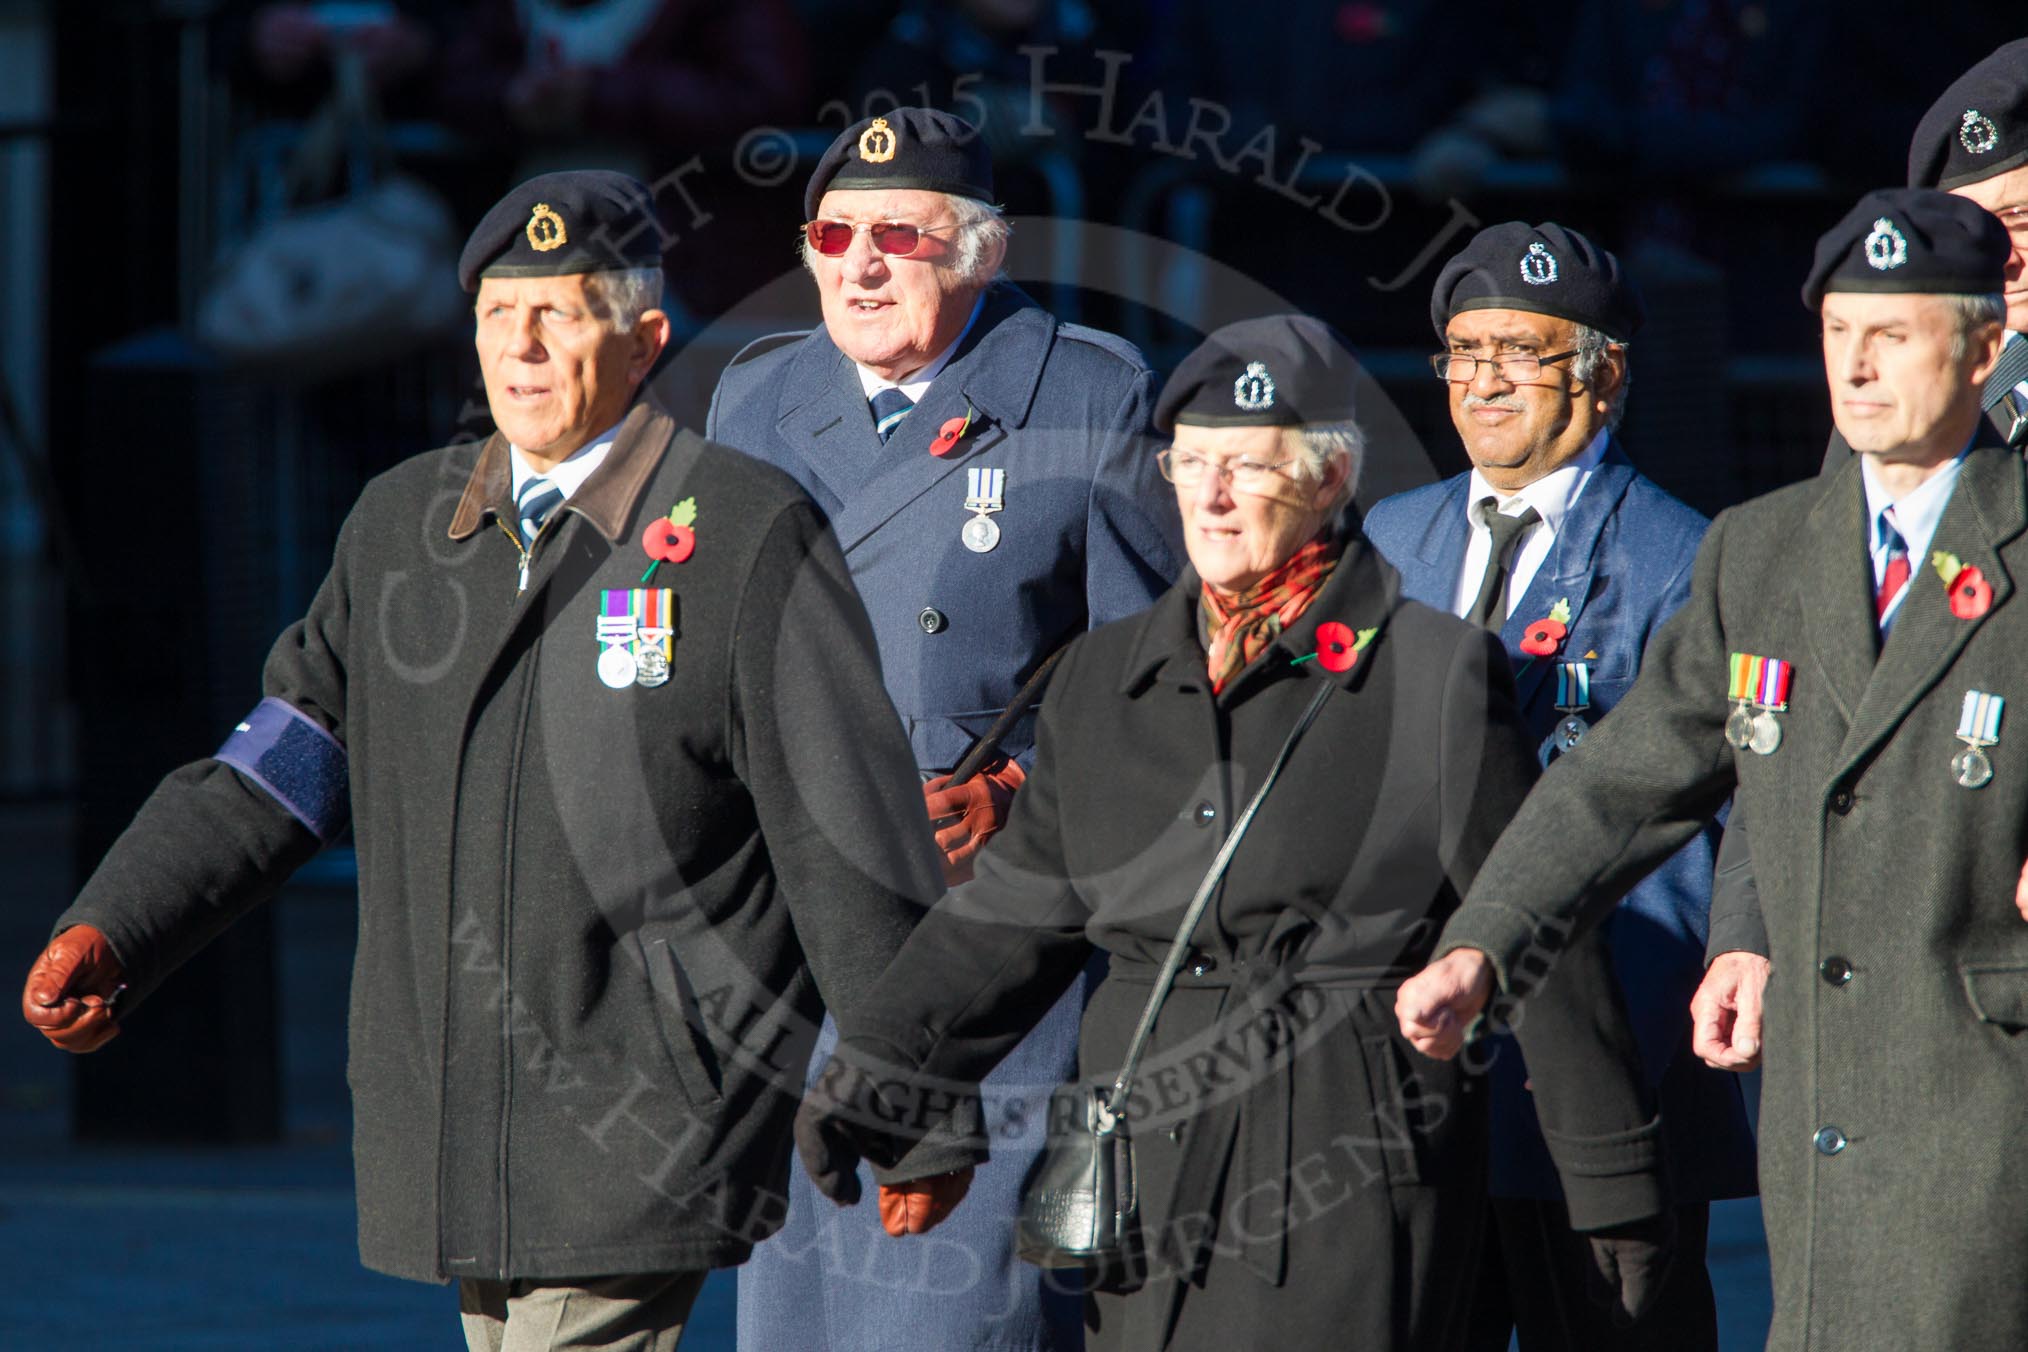 Remembrance Sunday Cenotaph March Past 2013: C9 - Royal Observer Corps Association..
Press stand opposite the Foreign Office building, Whitehall, London SW1,
London,
Greater London,
United Kingdom,
on 10 November 2013 at 12:07, image #1747